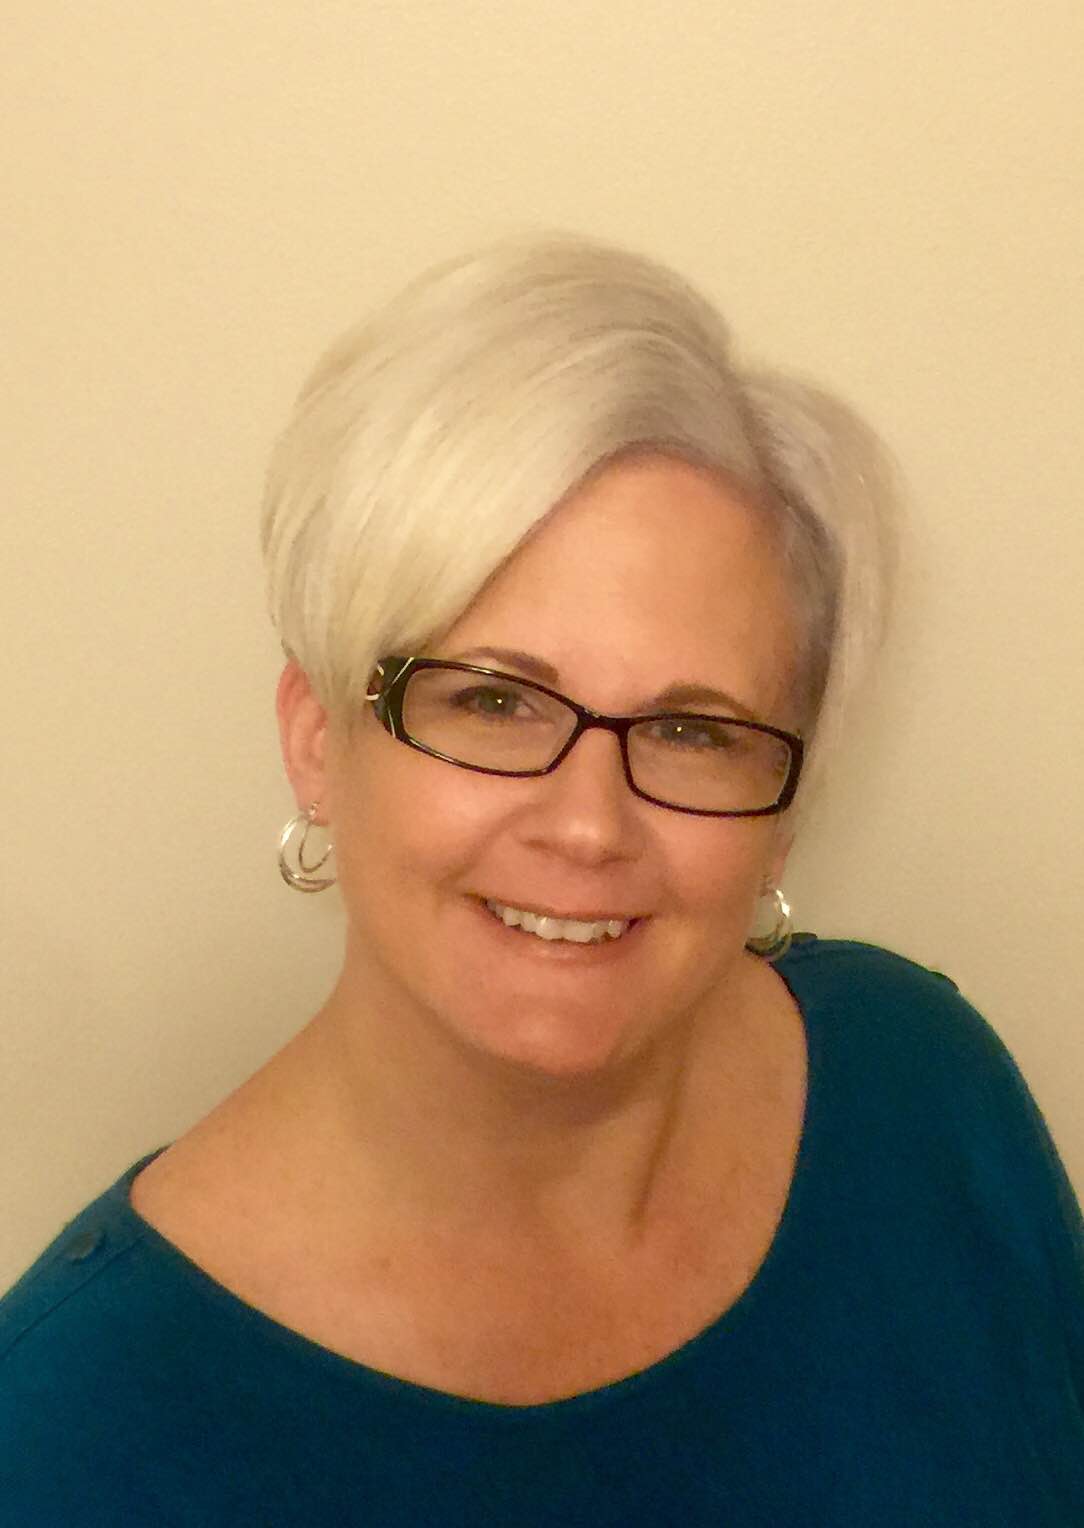 Meet Jenay Kightlinger-Sharp, Matchbook Learning’s new Director of Human Resources!